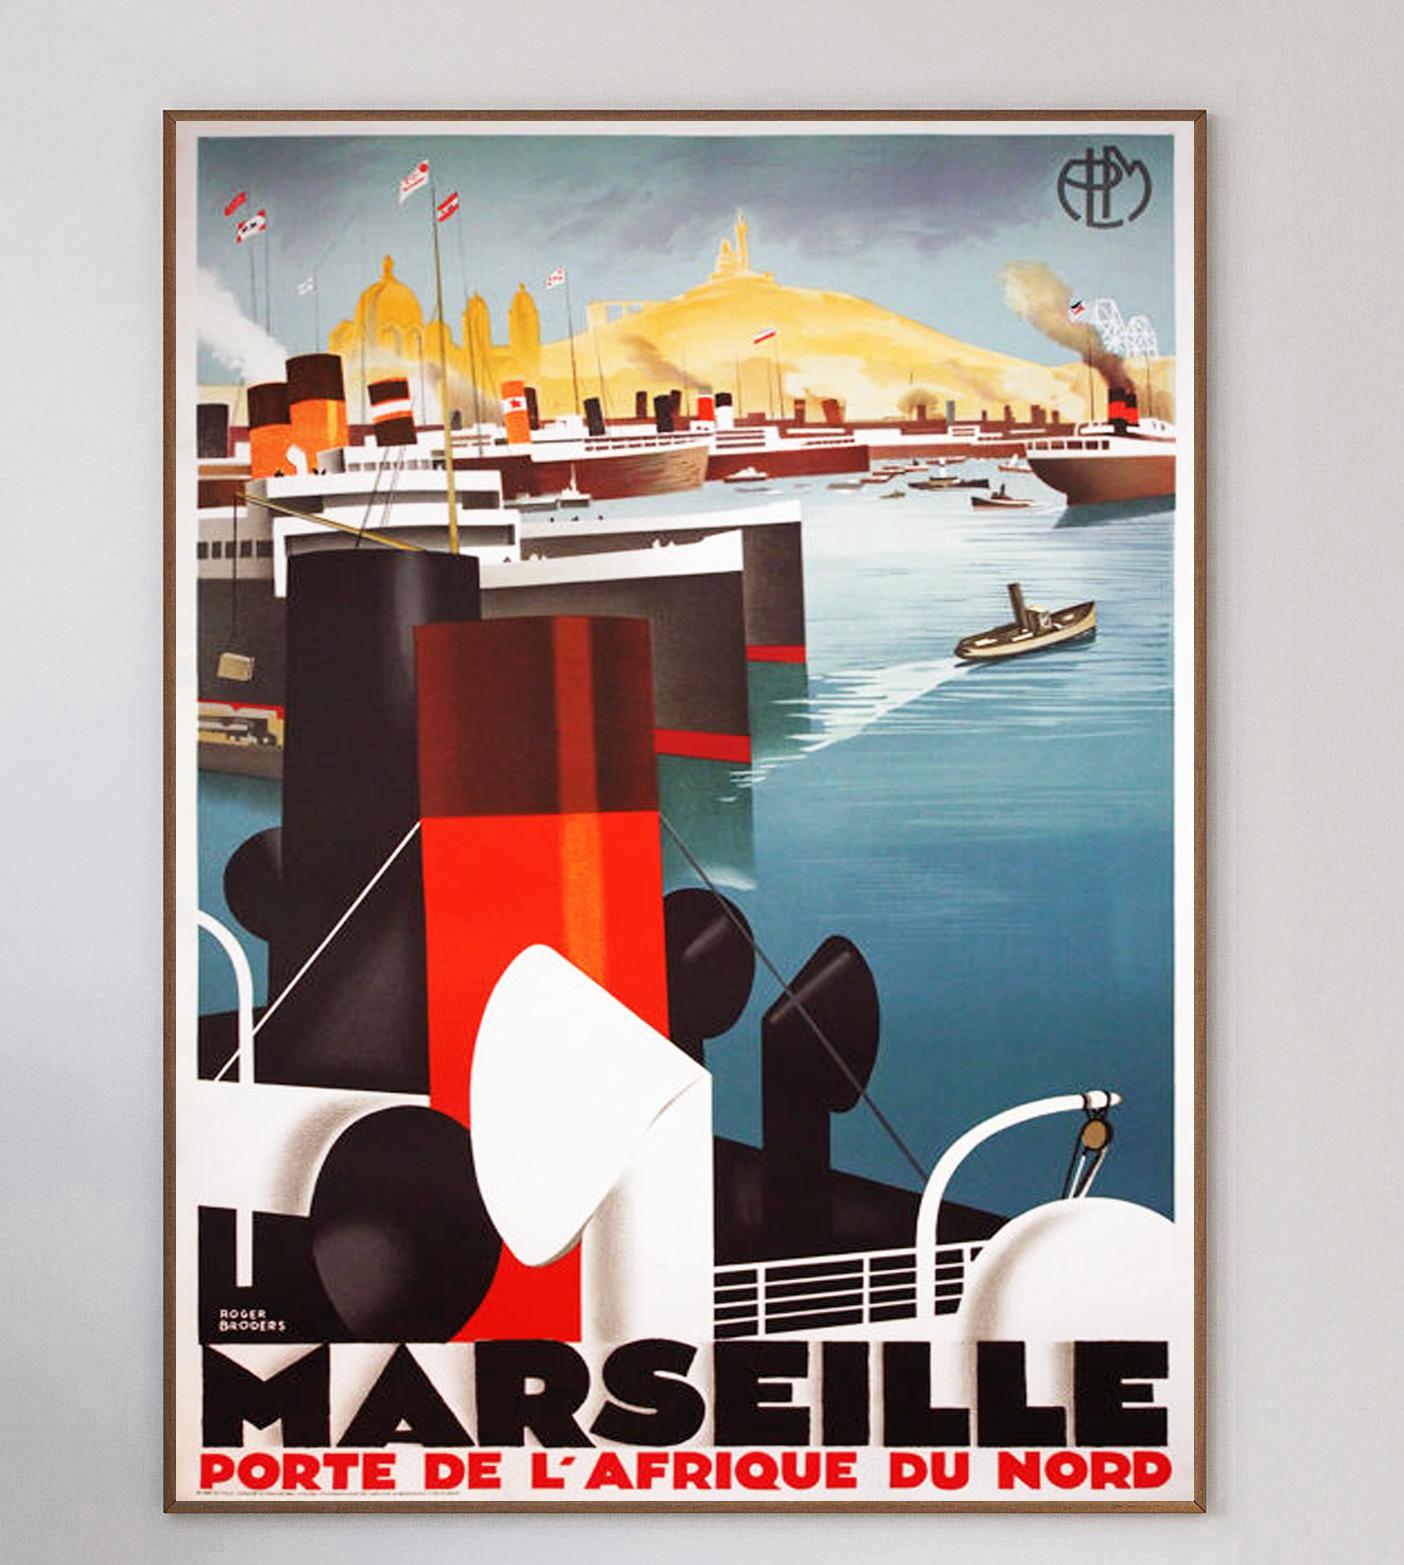 Originally created in 1930, this beautiful art deco poster advertises the 